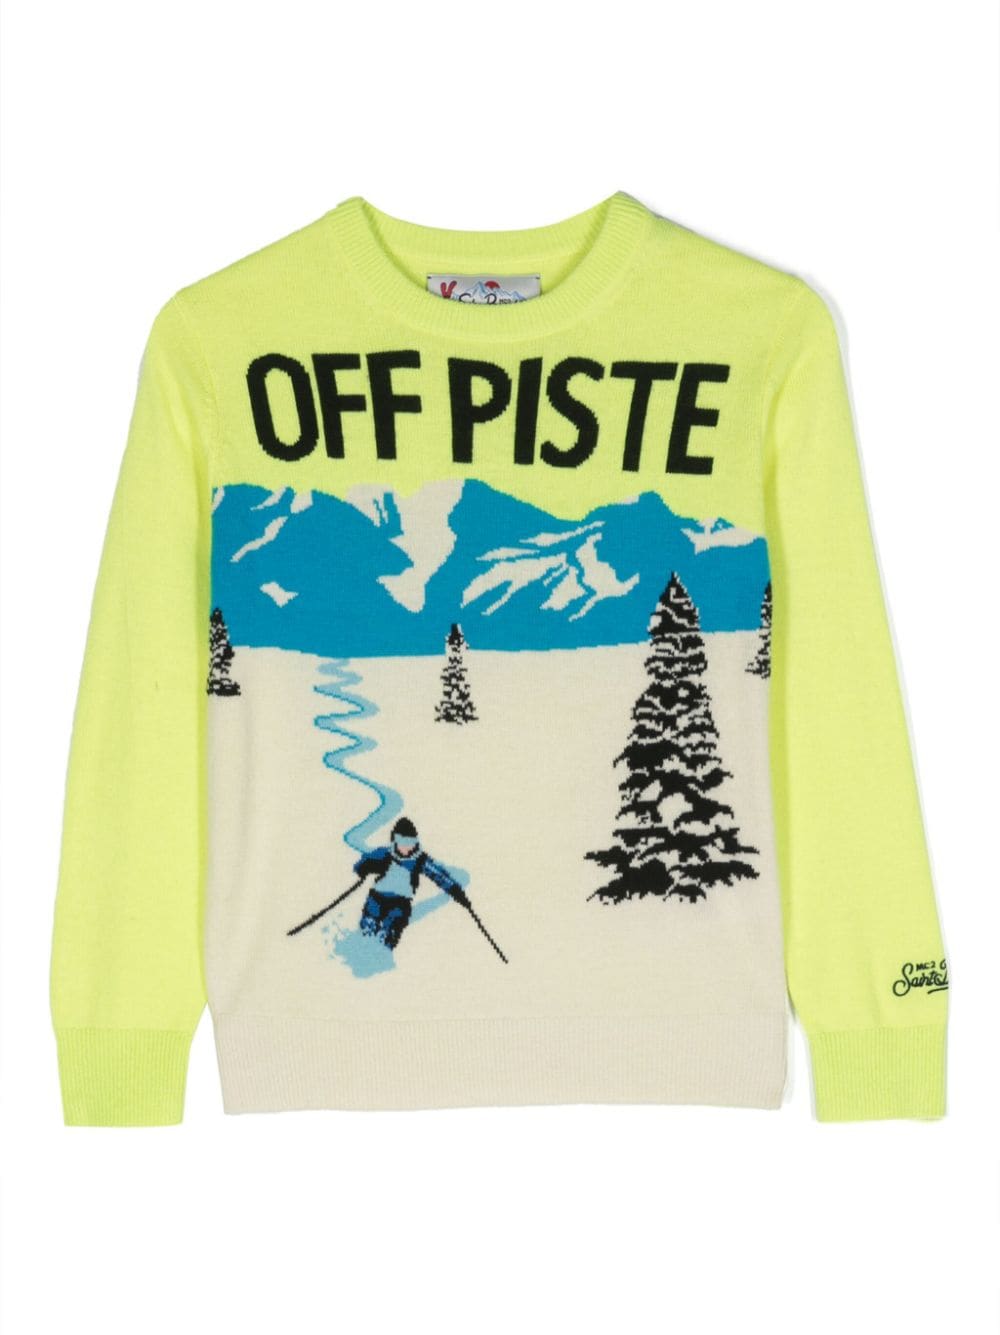 Off Piste sweater with intarsia pattern